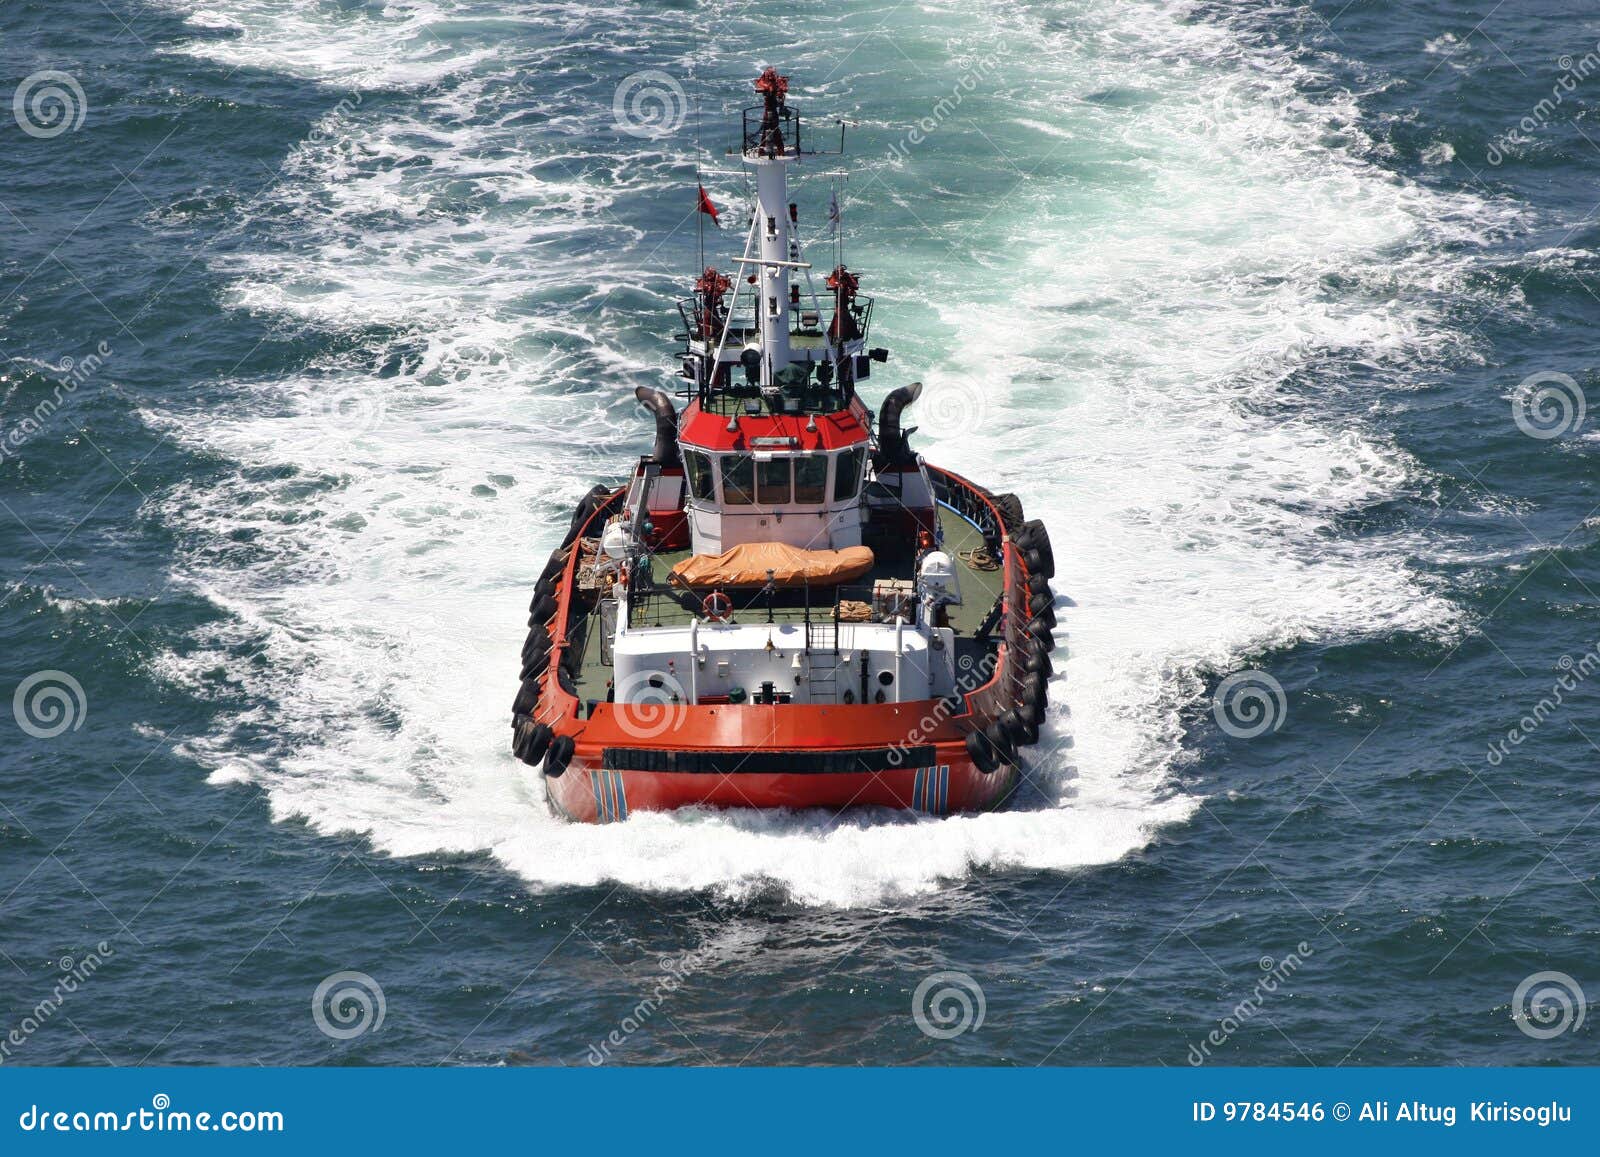 coastal safety, salvage and rescue boat